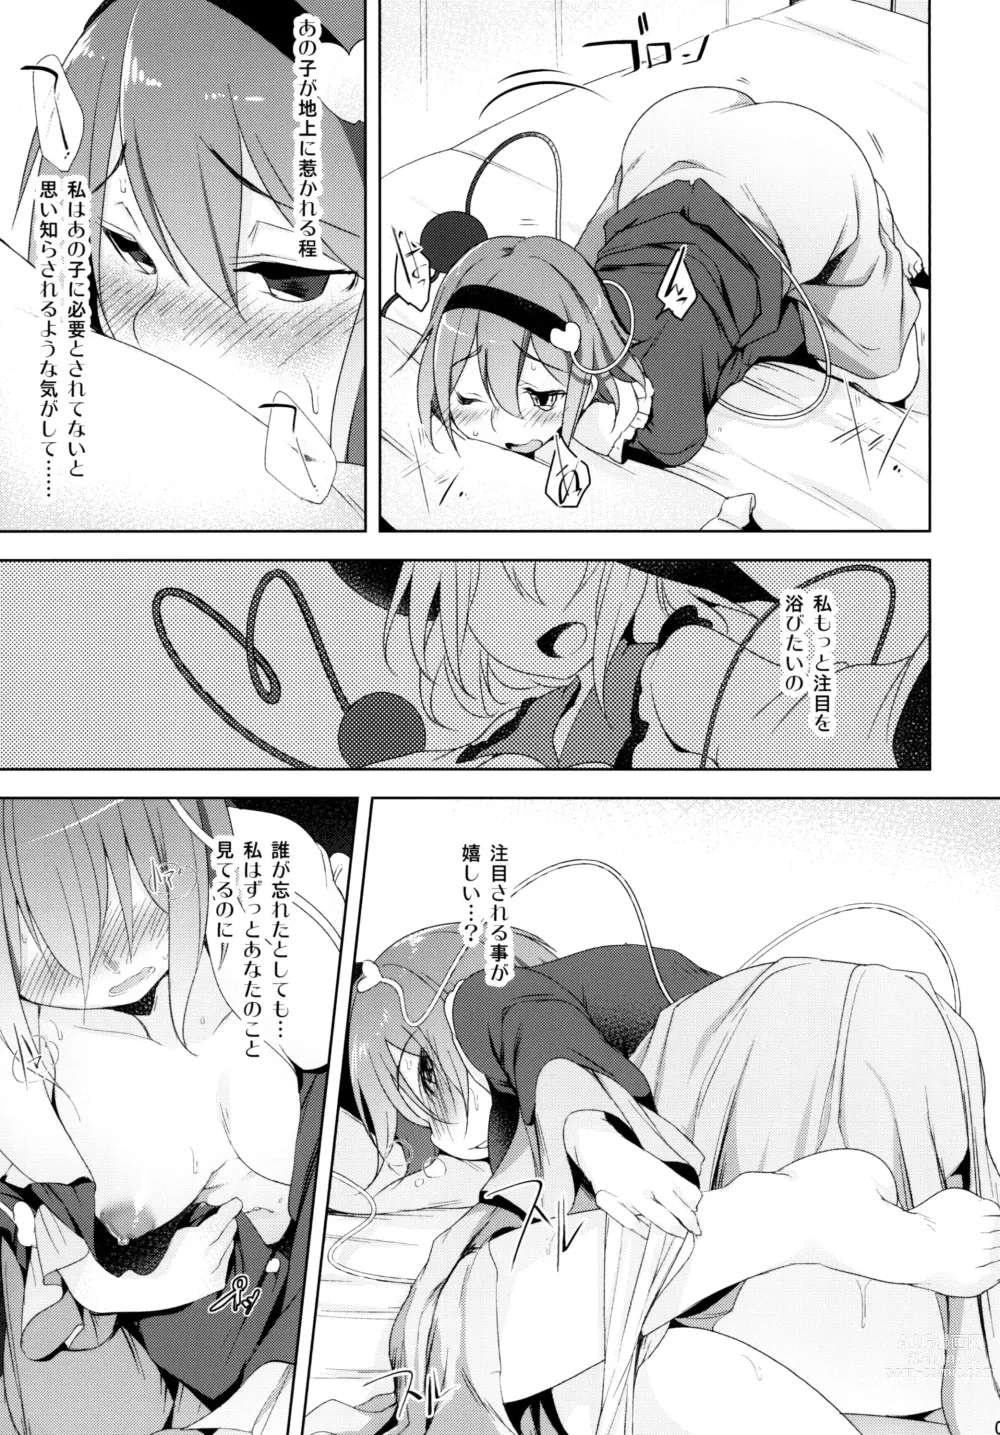 Page 7 of doujinshi Incest